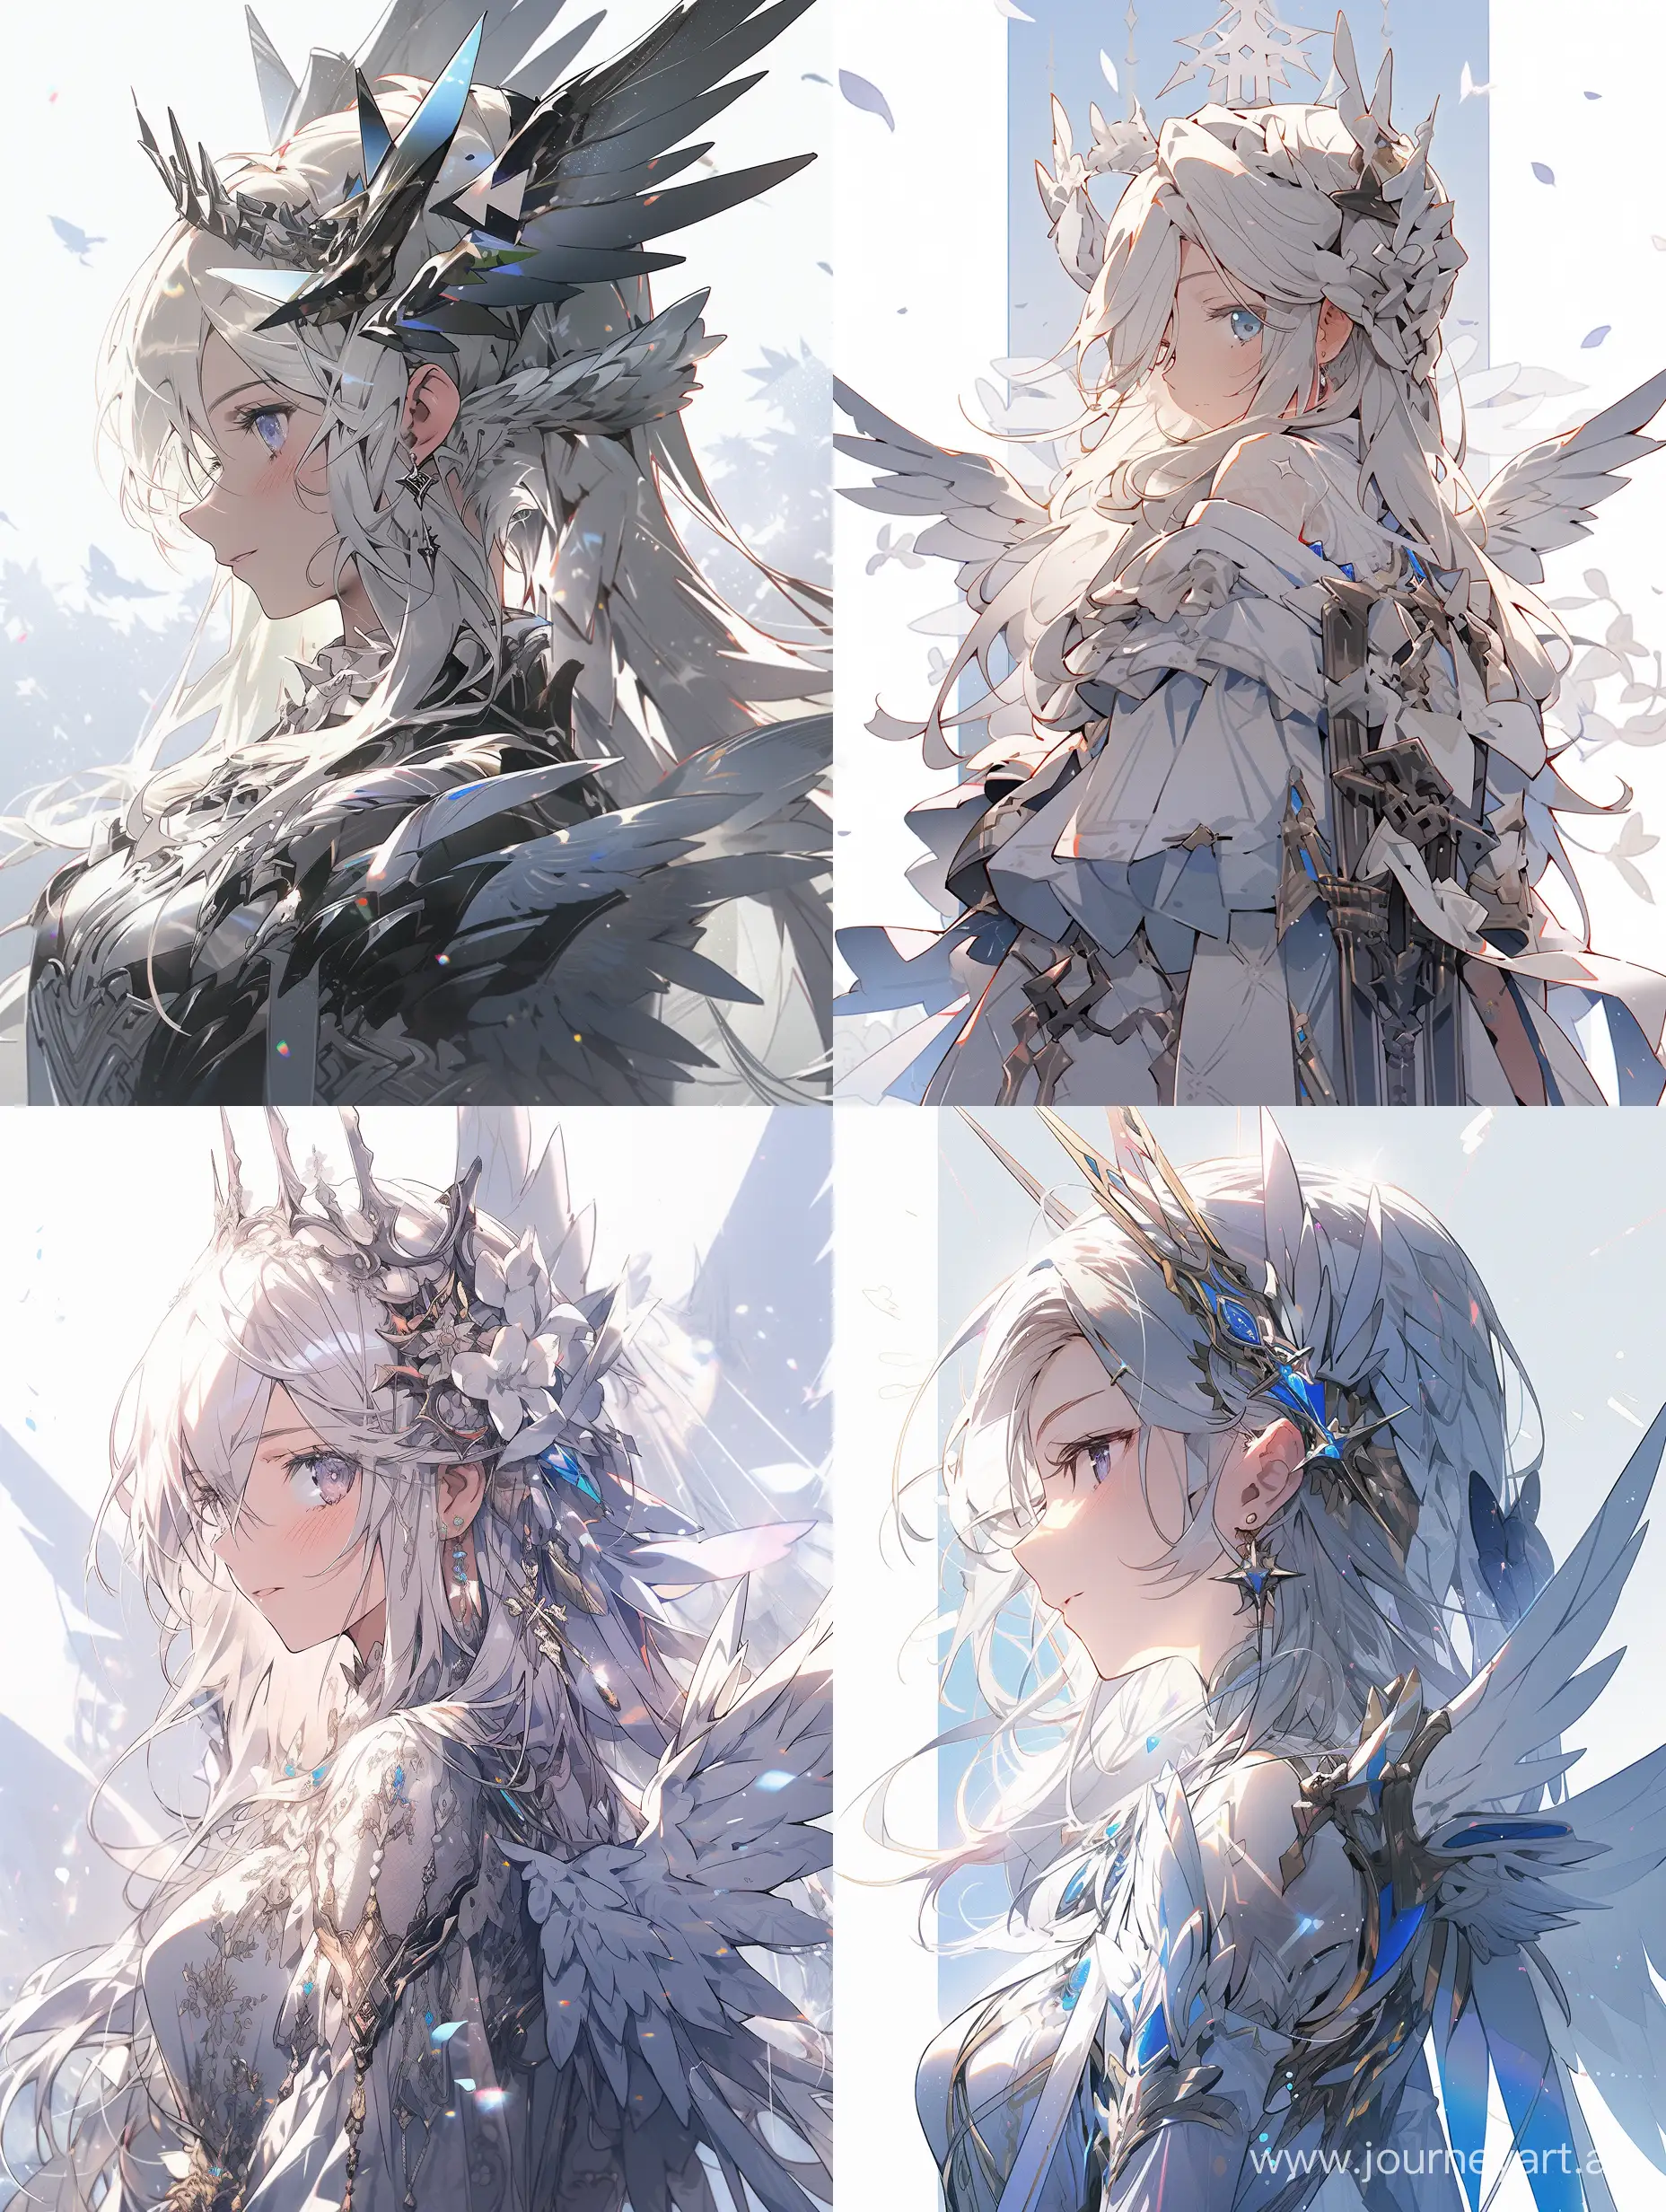 White::1.1 angel with large black wings, standing in front of a sky background with white and blue hues, the angel has white hair and is wearing a armor-like outfit, the wings are spread out and there are white paint drips trailing from them, --niji 5 --s 500